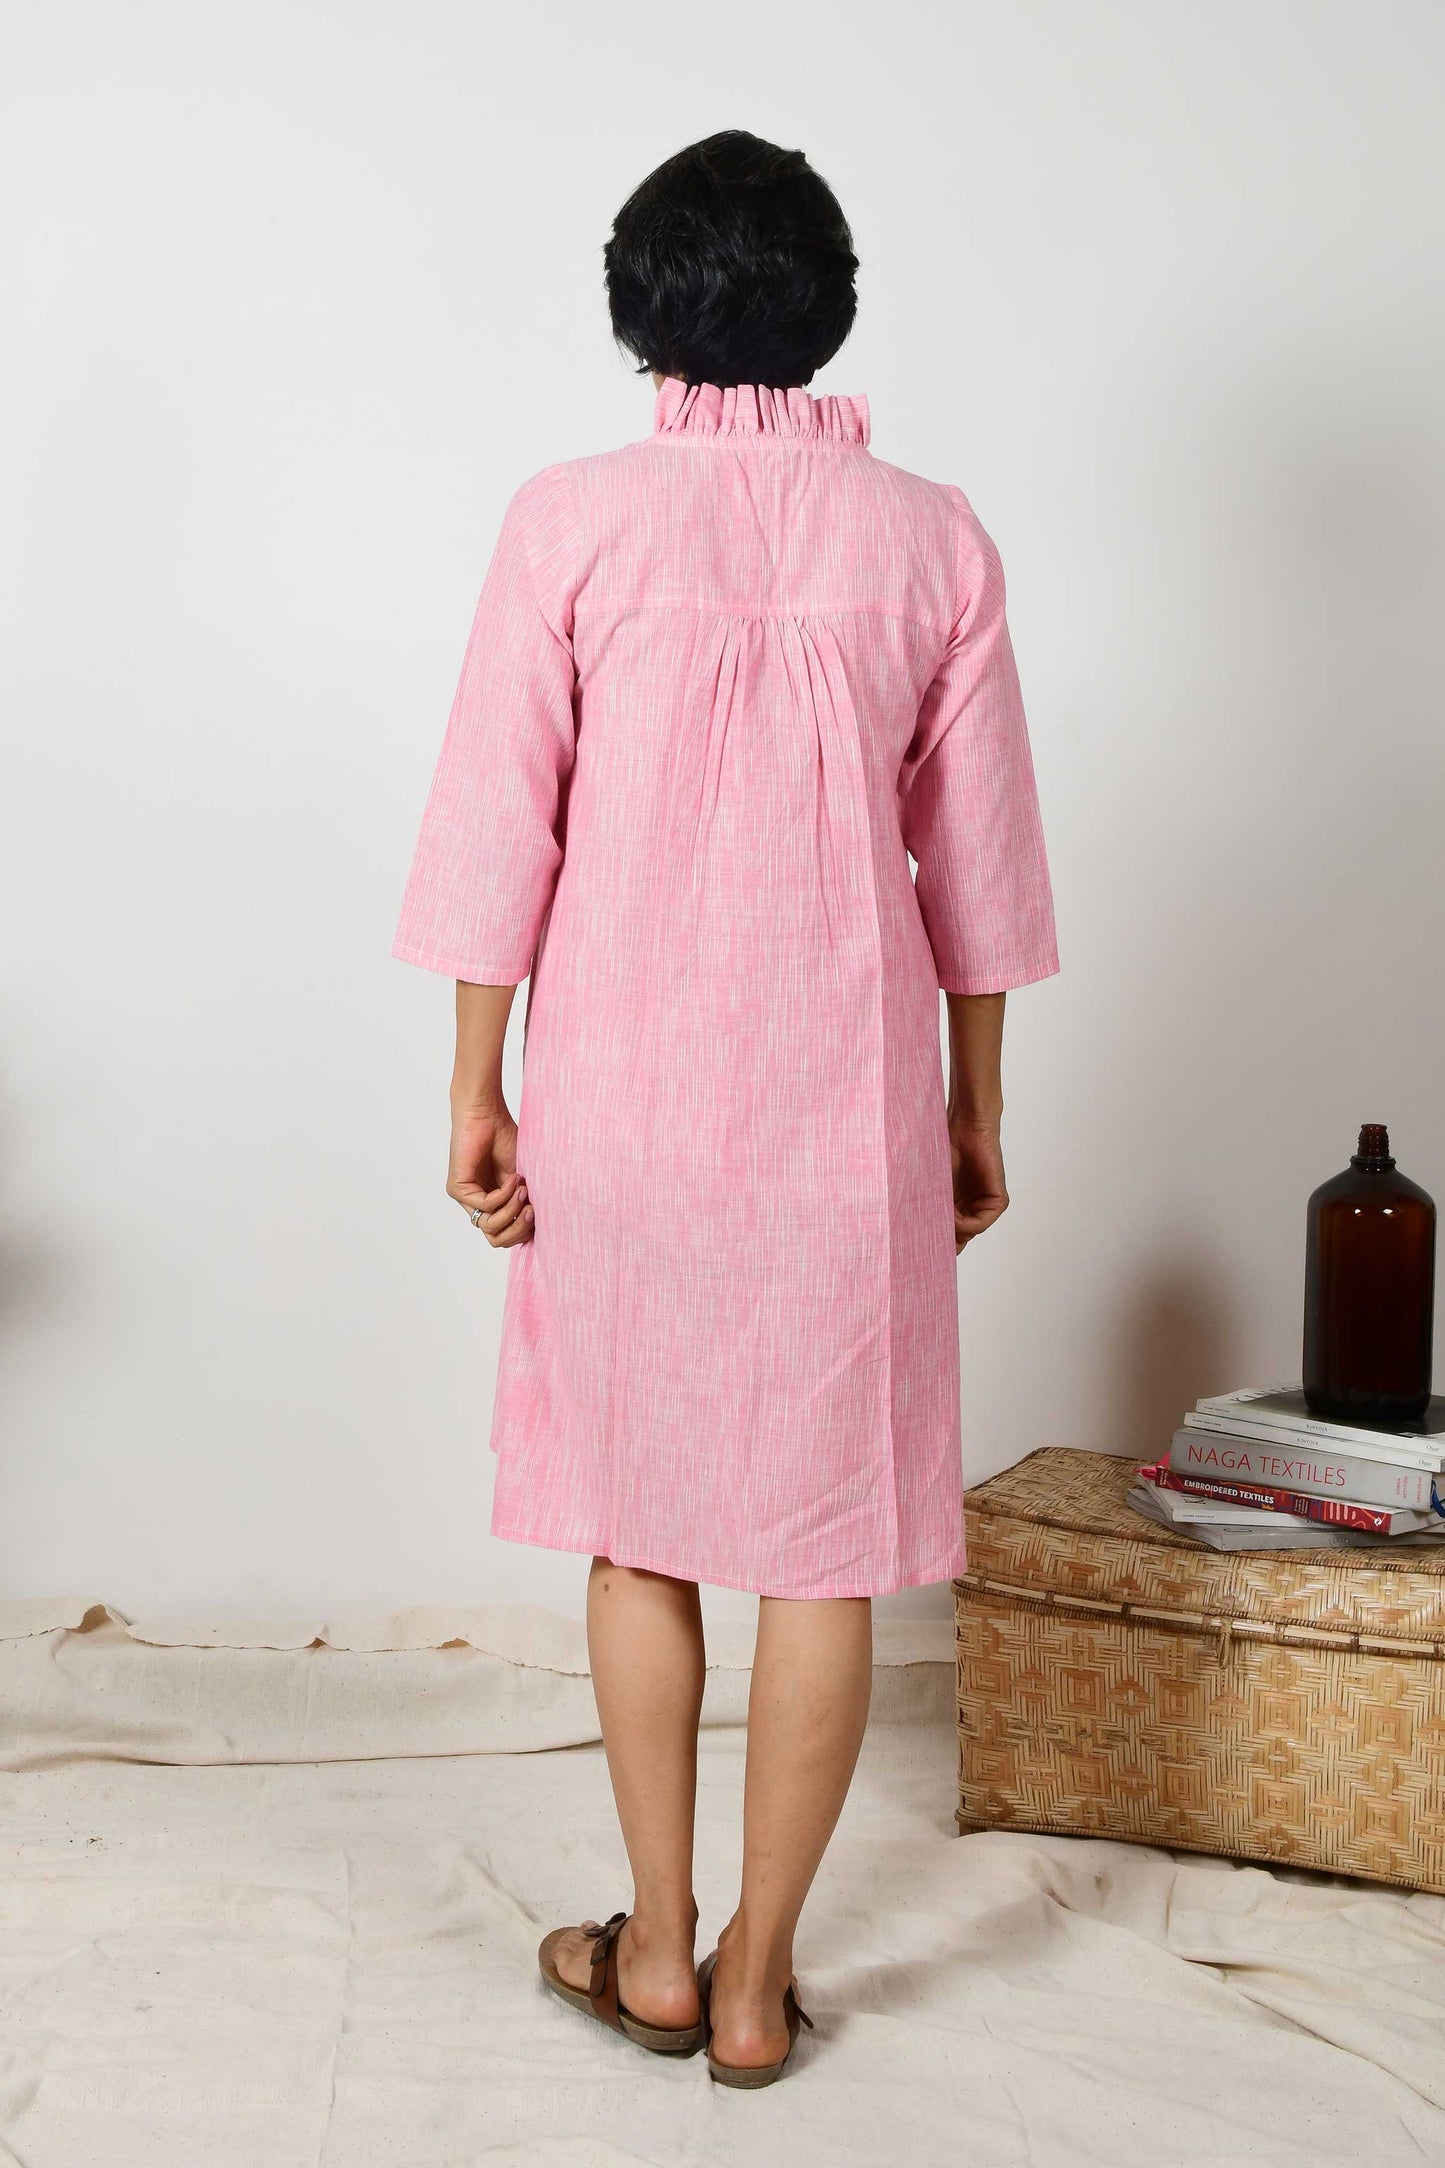 back of an indian fashion model wearing a pink kurta dress with flared neck and back yoke gather details.